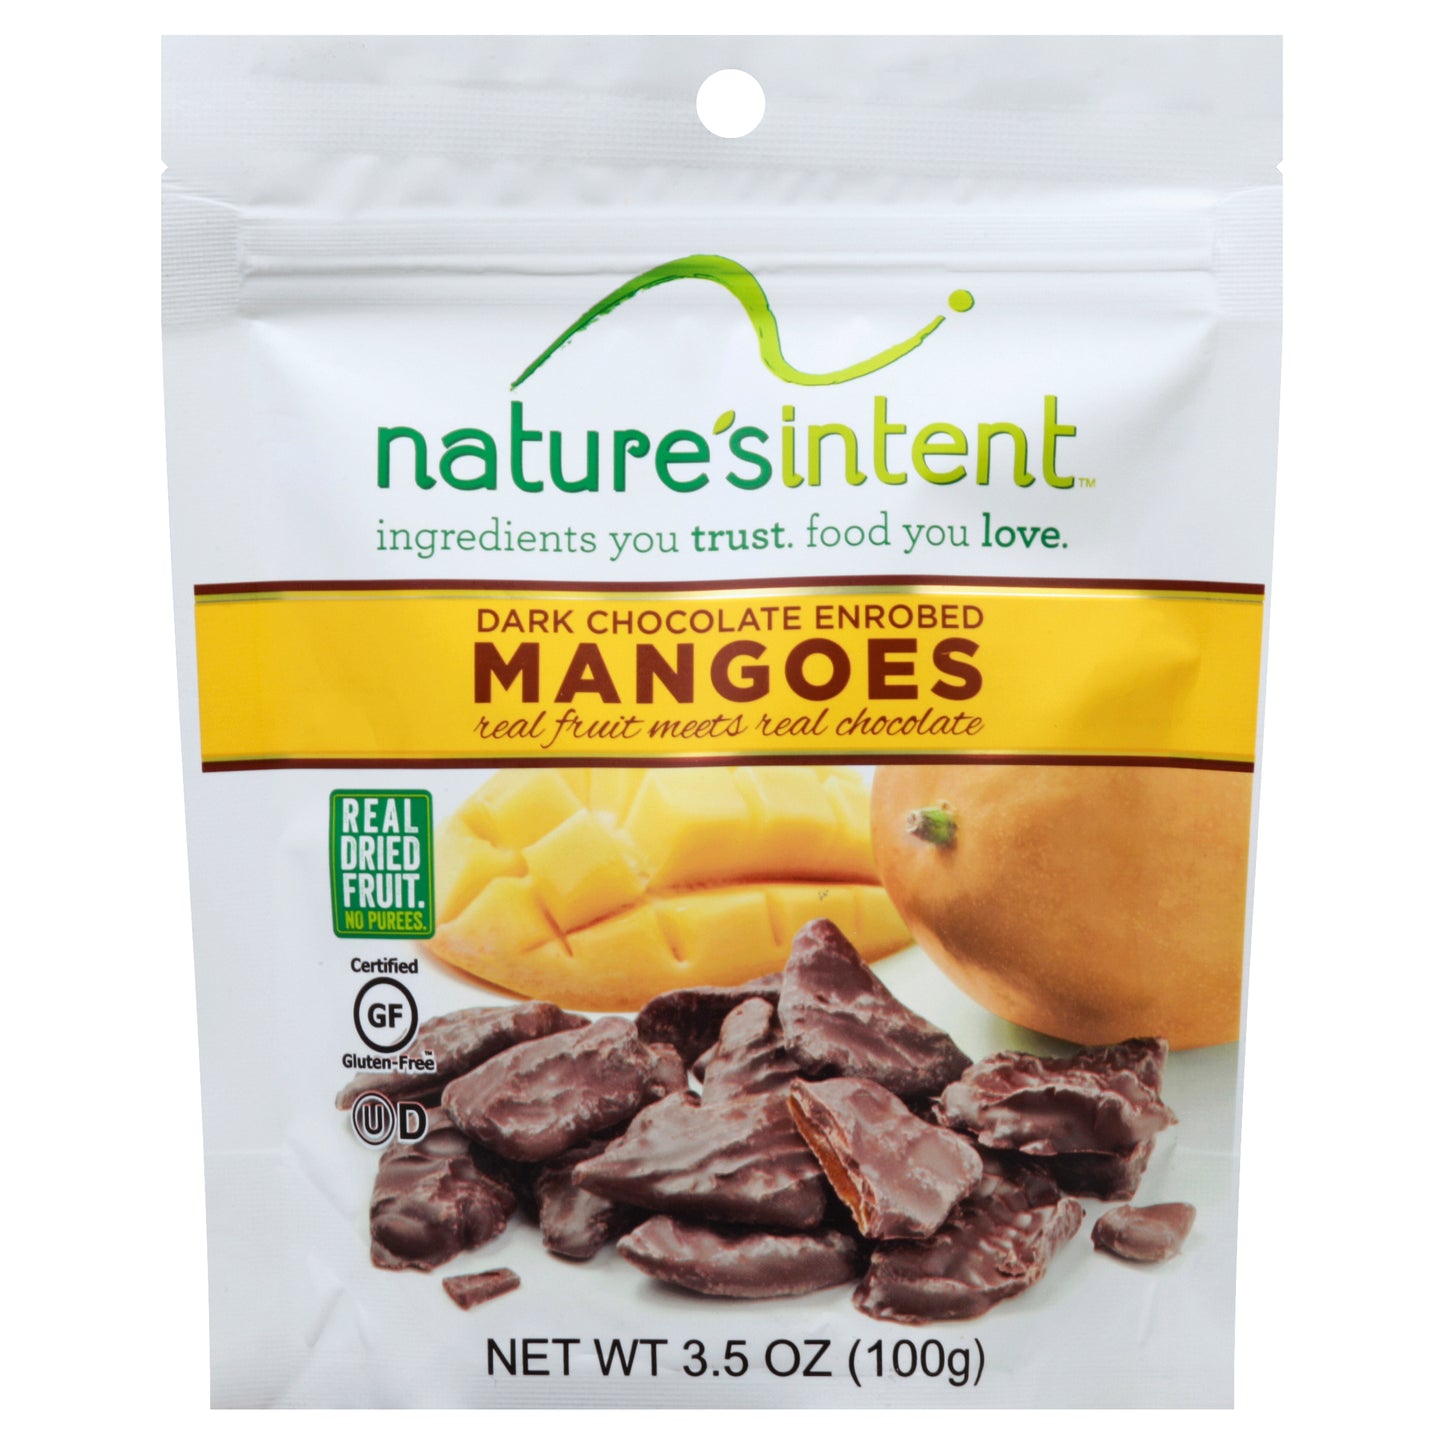 Natures Intent Mangoes Dark Chocolate Covered 3.5 oz (Pack Of 12)